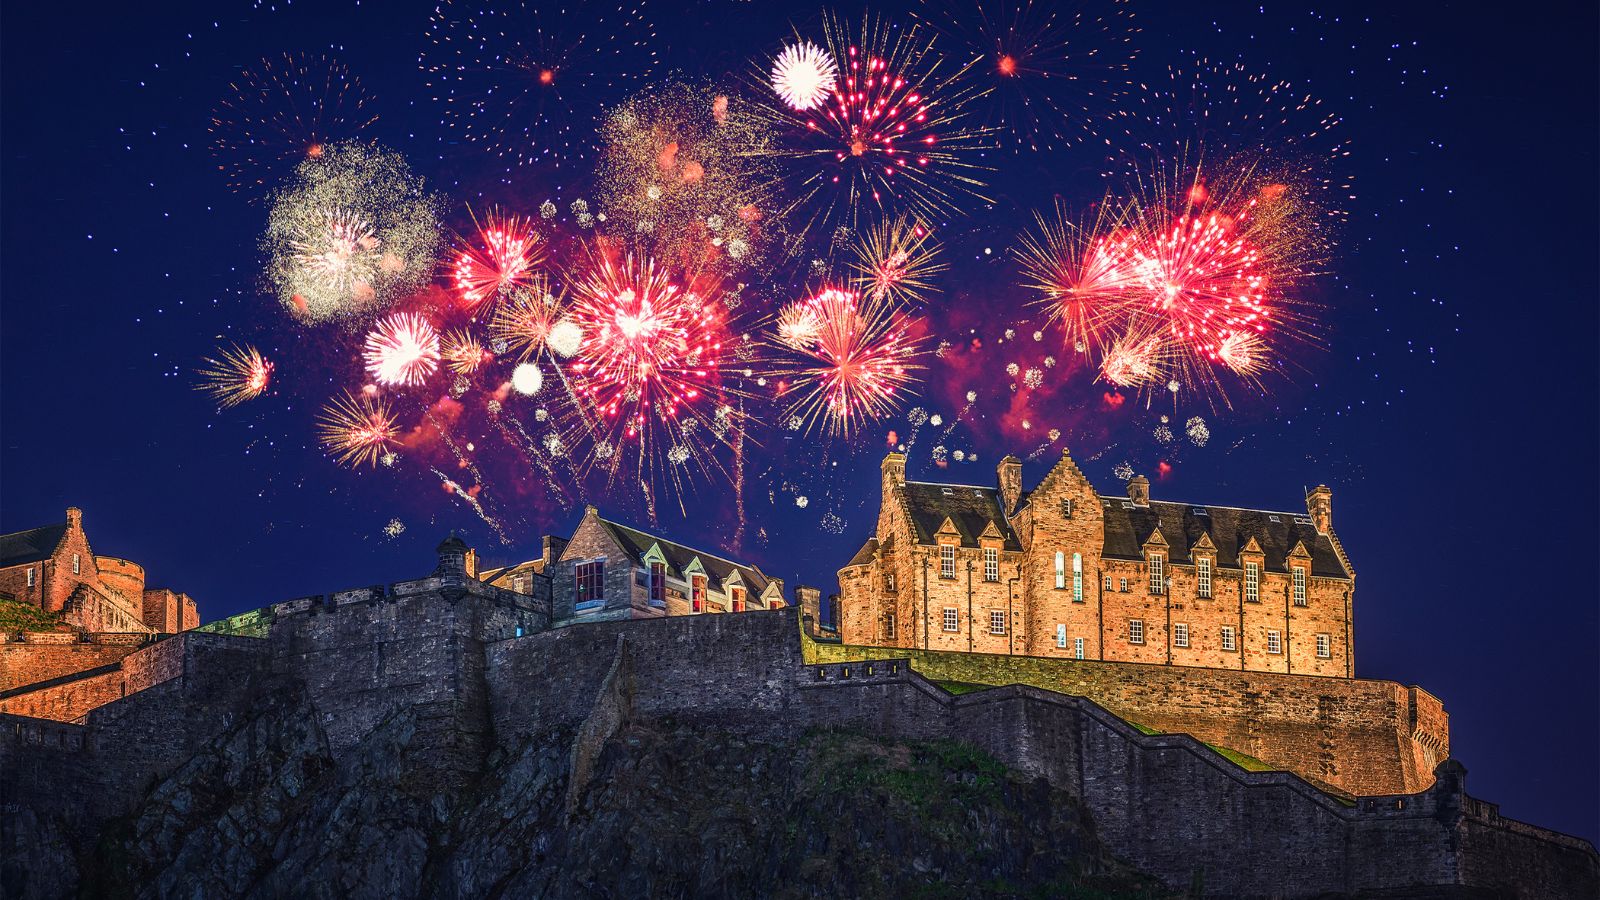 <p>It would take too long to list them all, but here’s a selection of the best things to do in Scotland for culture:</p><ul> <li>Culloden Battlefield – the site of the last pitched battle ever fought on UK soil</li> <li>Edinburgh Fringe Festival – a huge annual event showcasing a diverse array of arts and entertainment</li> <li>Highland Folk Museum – an open-air museum showcasing Highland life from the 18<sup>th</sup> through to the 20<sup>th</sup> Century</li> <li>Hogmanay – Scotland’s traditional New Year’s celebration on December 31<sup>st</sup></li> </ul><p>Consider a visit to Glasgow, too. It’s famous for its architecture and arts scene – not to mention the other perks of a big city.</p>